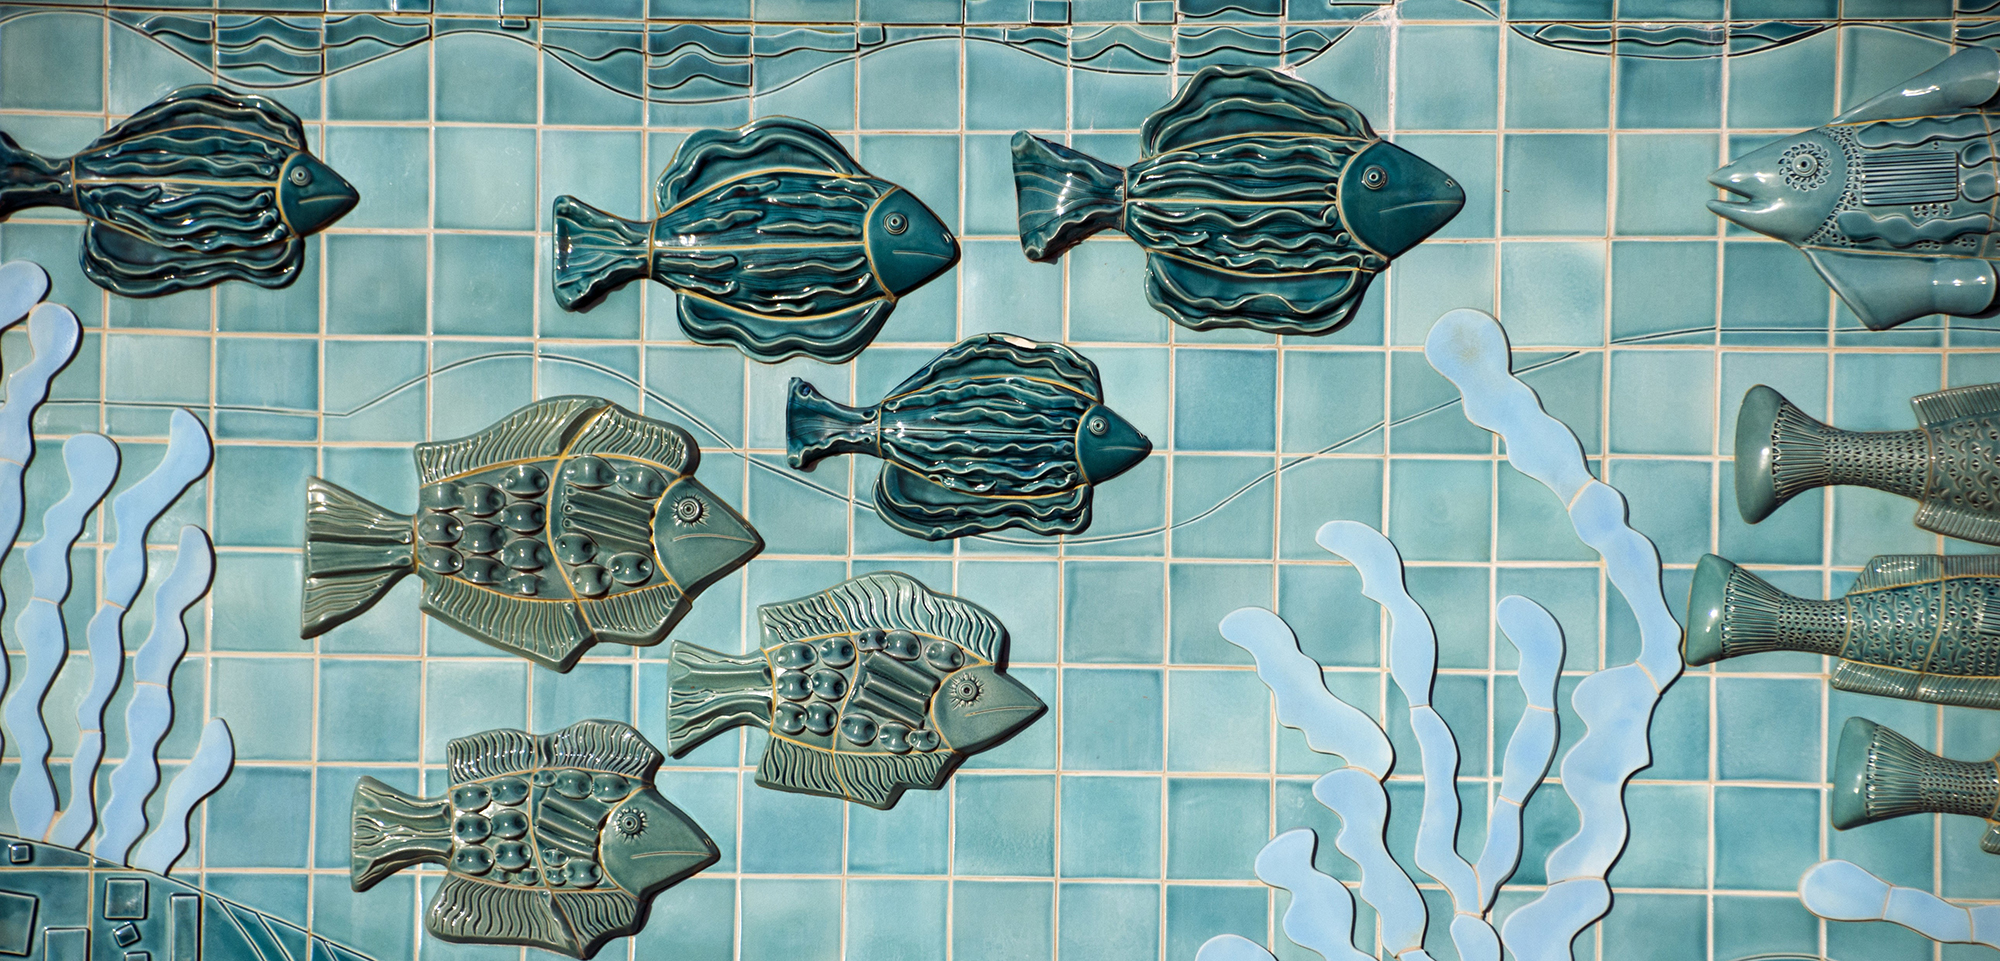 Before people started making ceramic fish, they had to invent pottery—something that may have been done to help with processing fish. Photo by Mitch Diamond/Ocean/Corbis